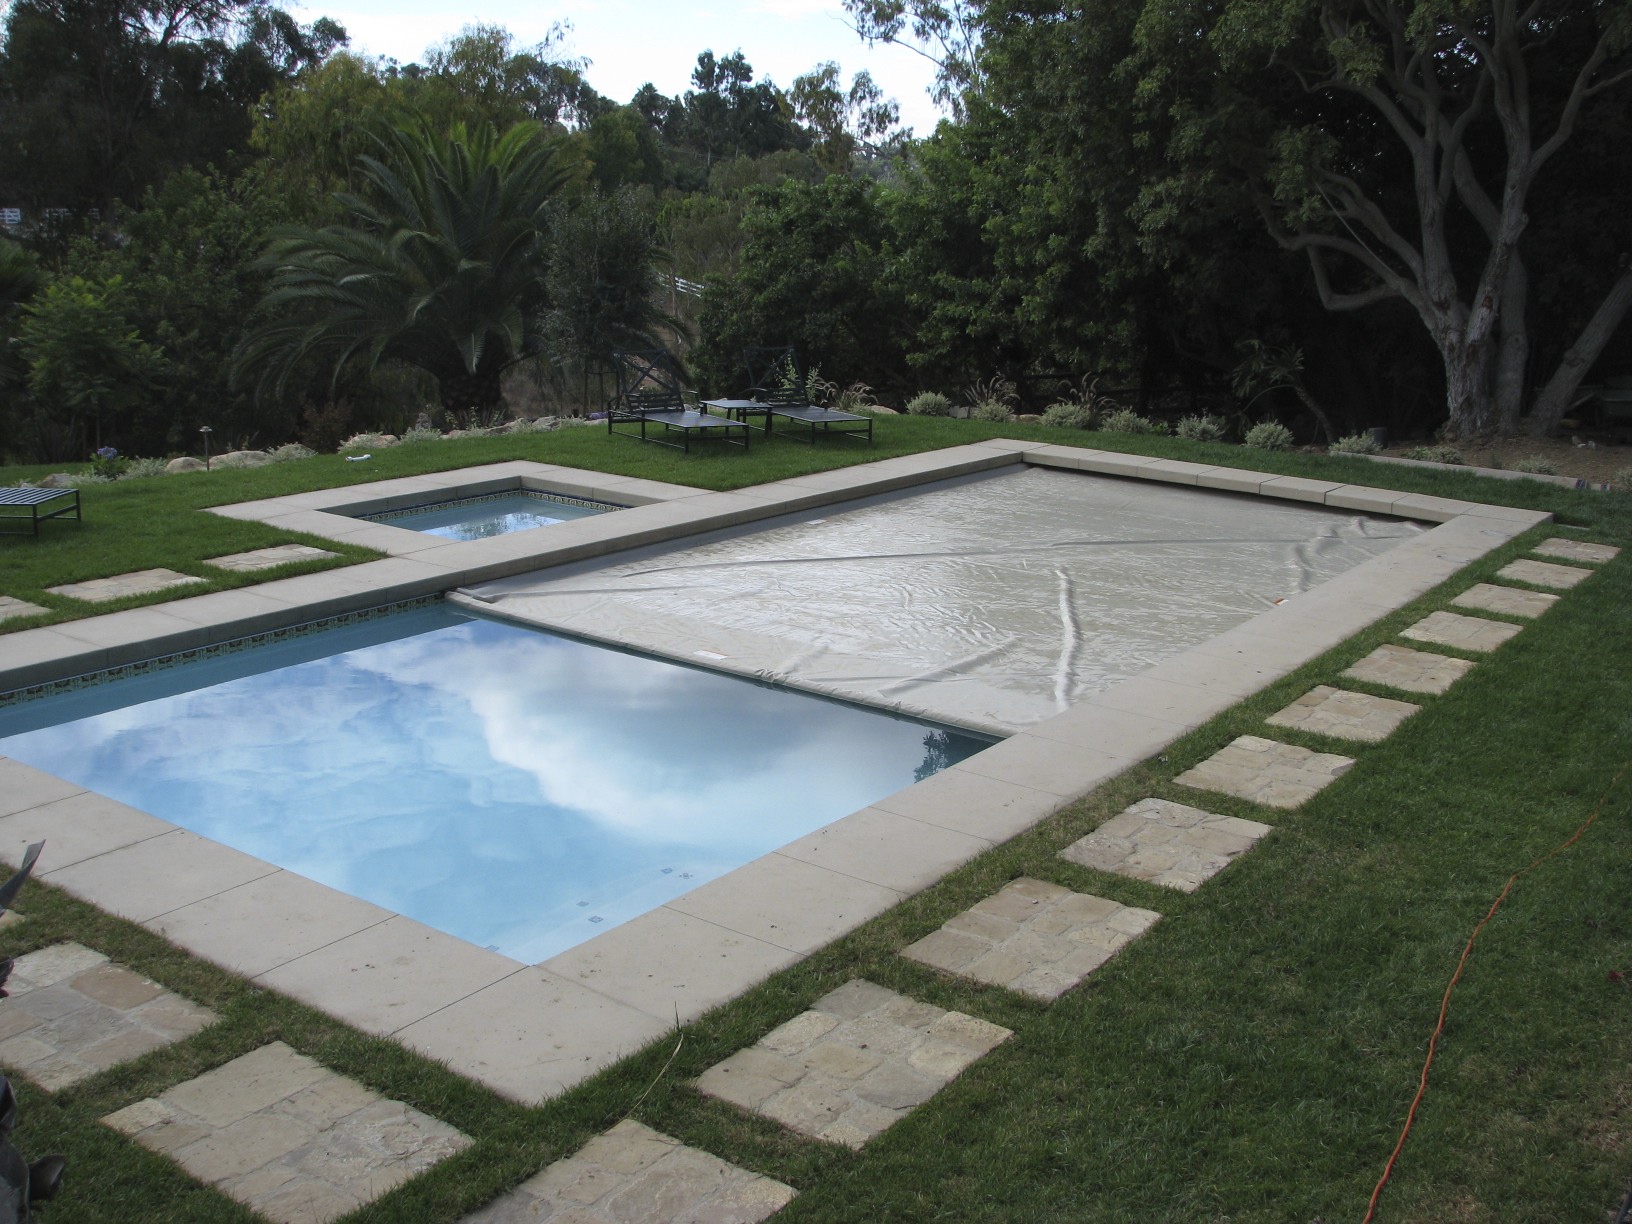 automatic pool cover manual